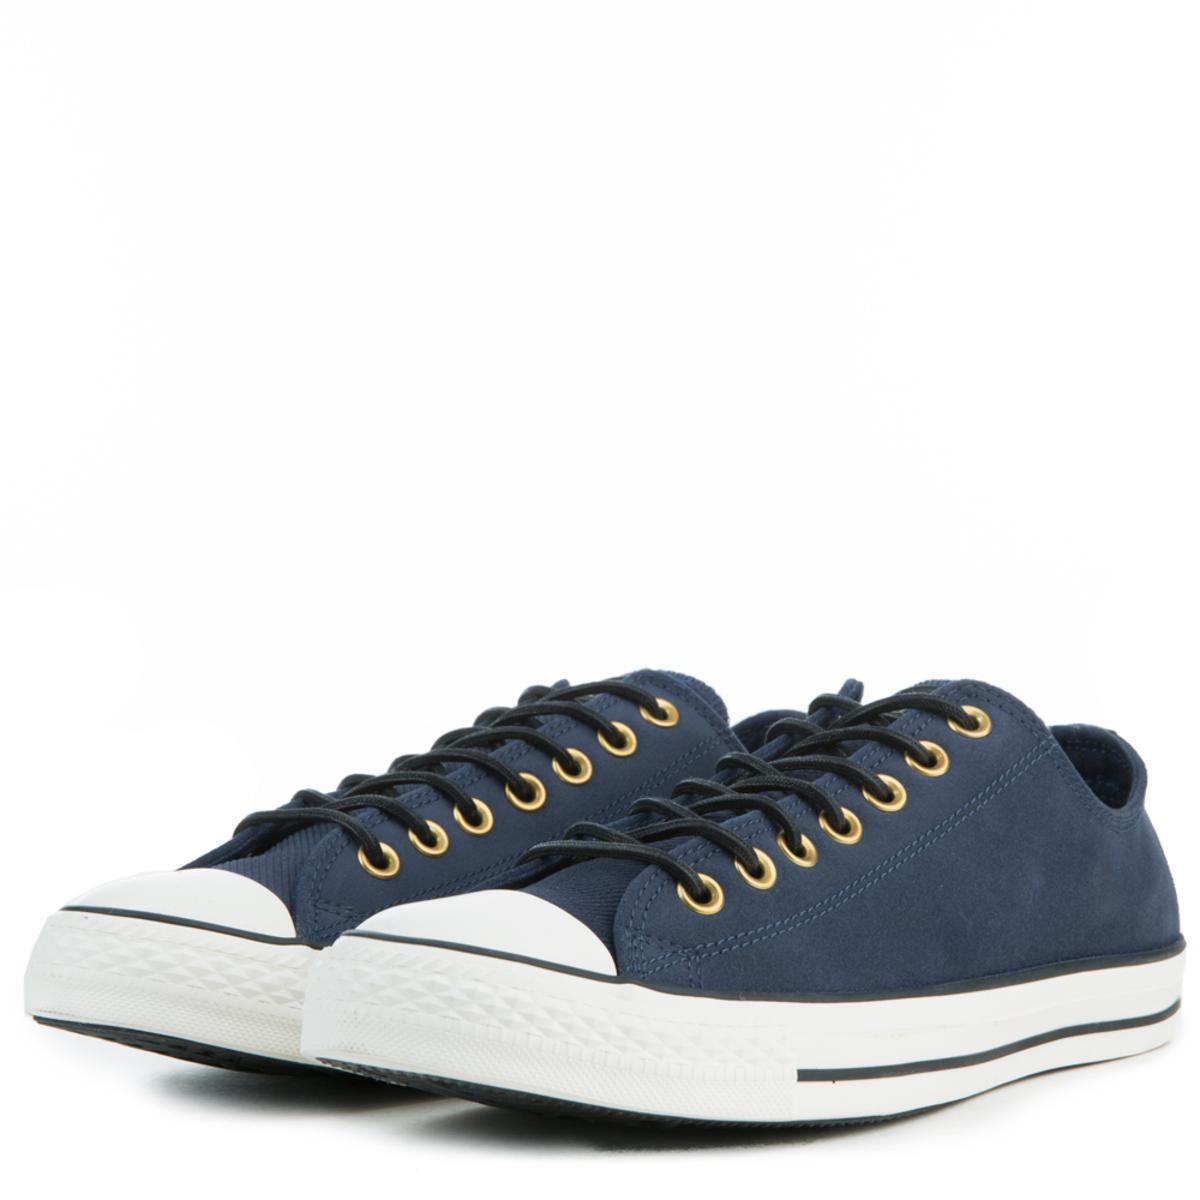 converse all star blue suede